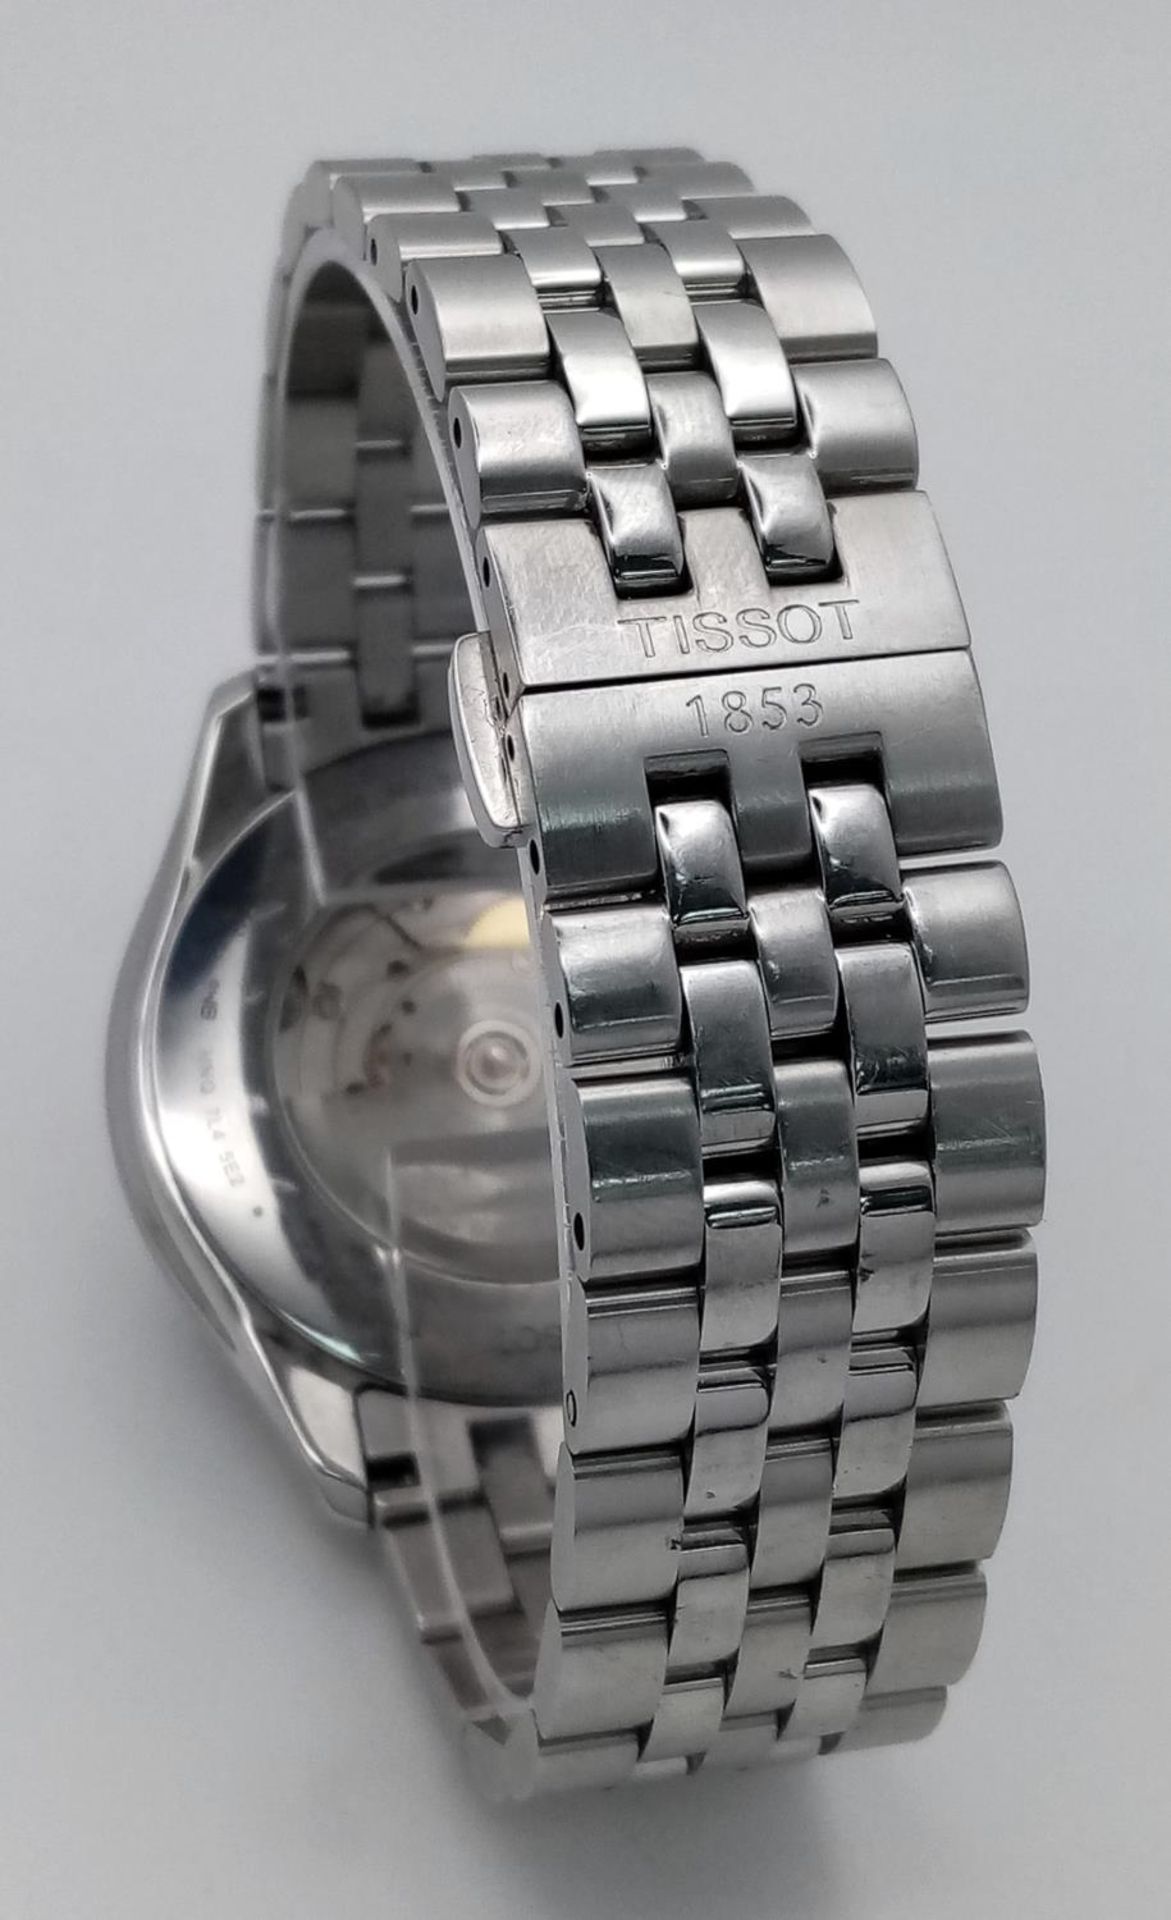 A Tissot Powermatic 80 Gents Watch. Stainless steel bracelet and case - 41mm. Black dial with date - Bild 21 aus 28